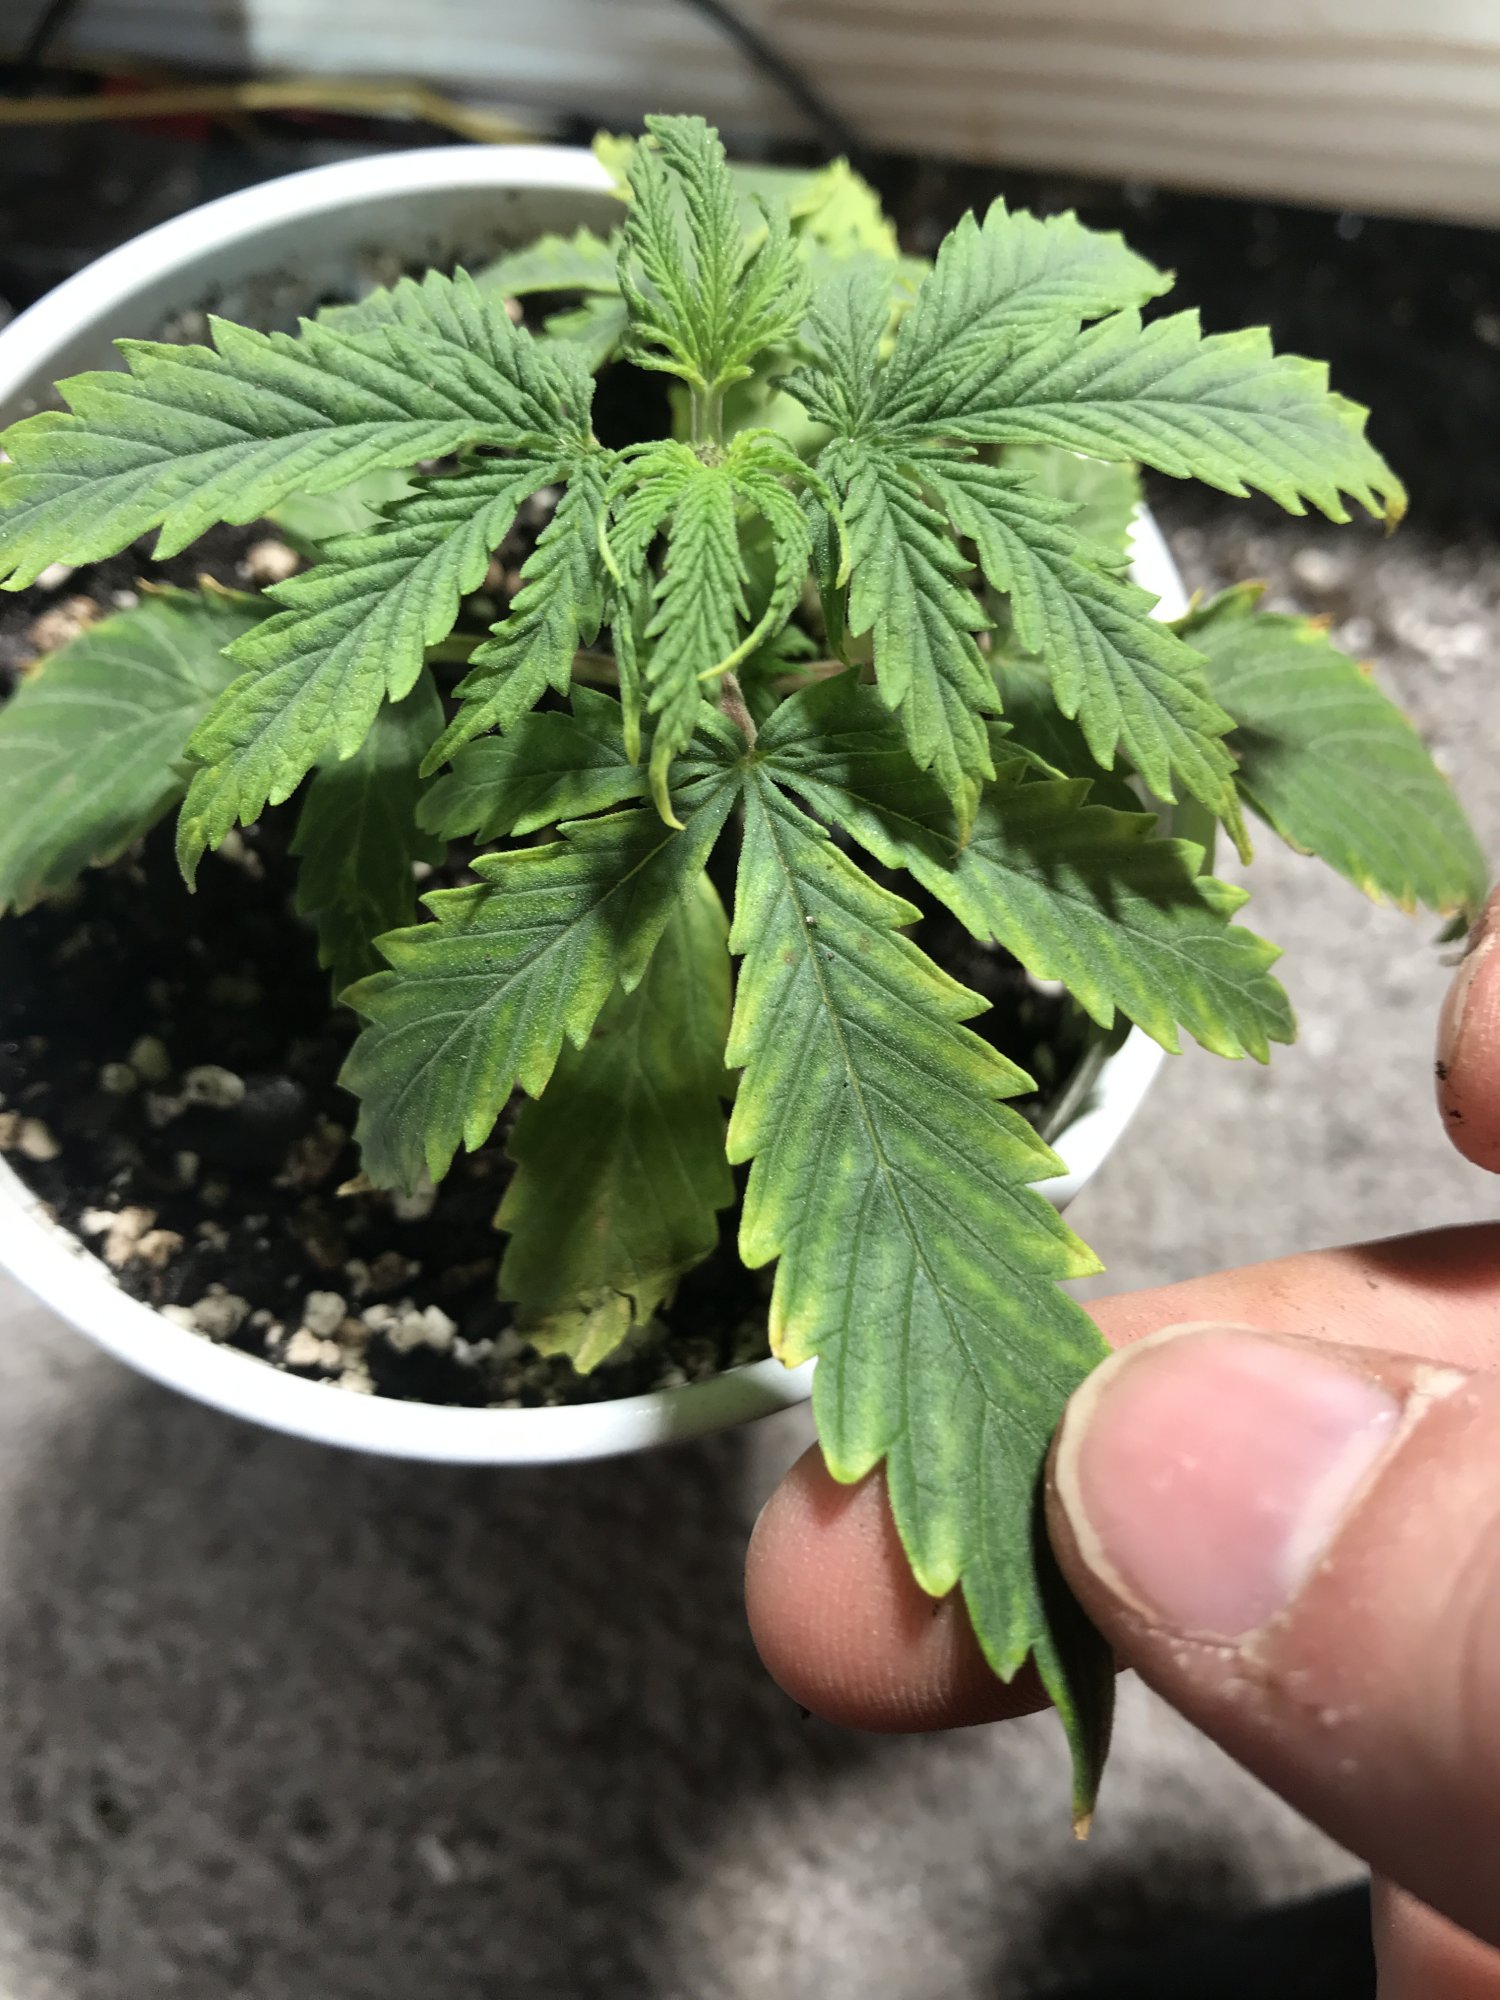 Can some one tell me what is wrong with my plant 5